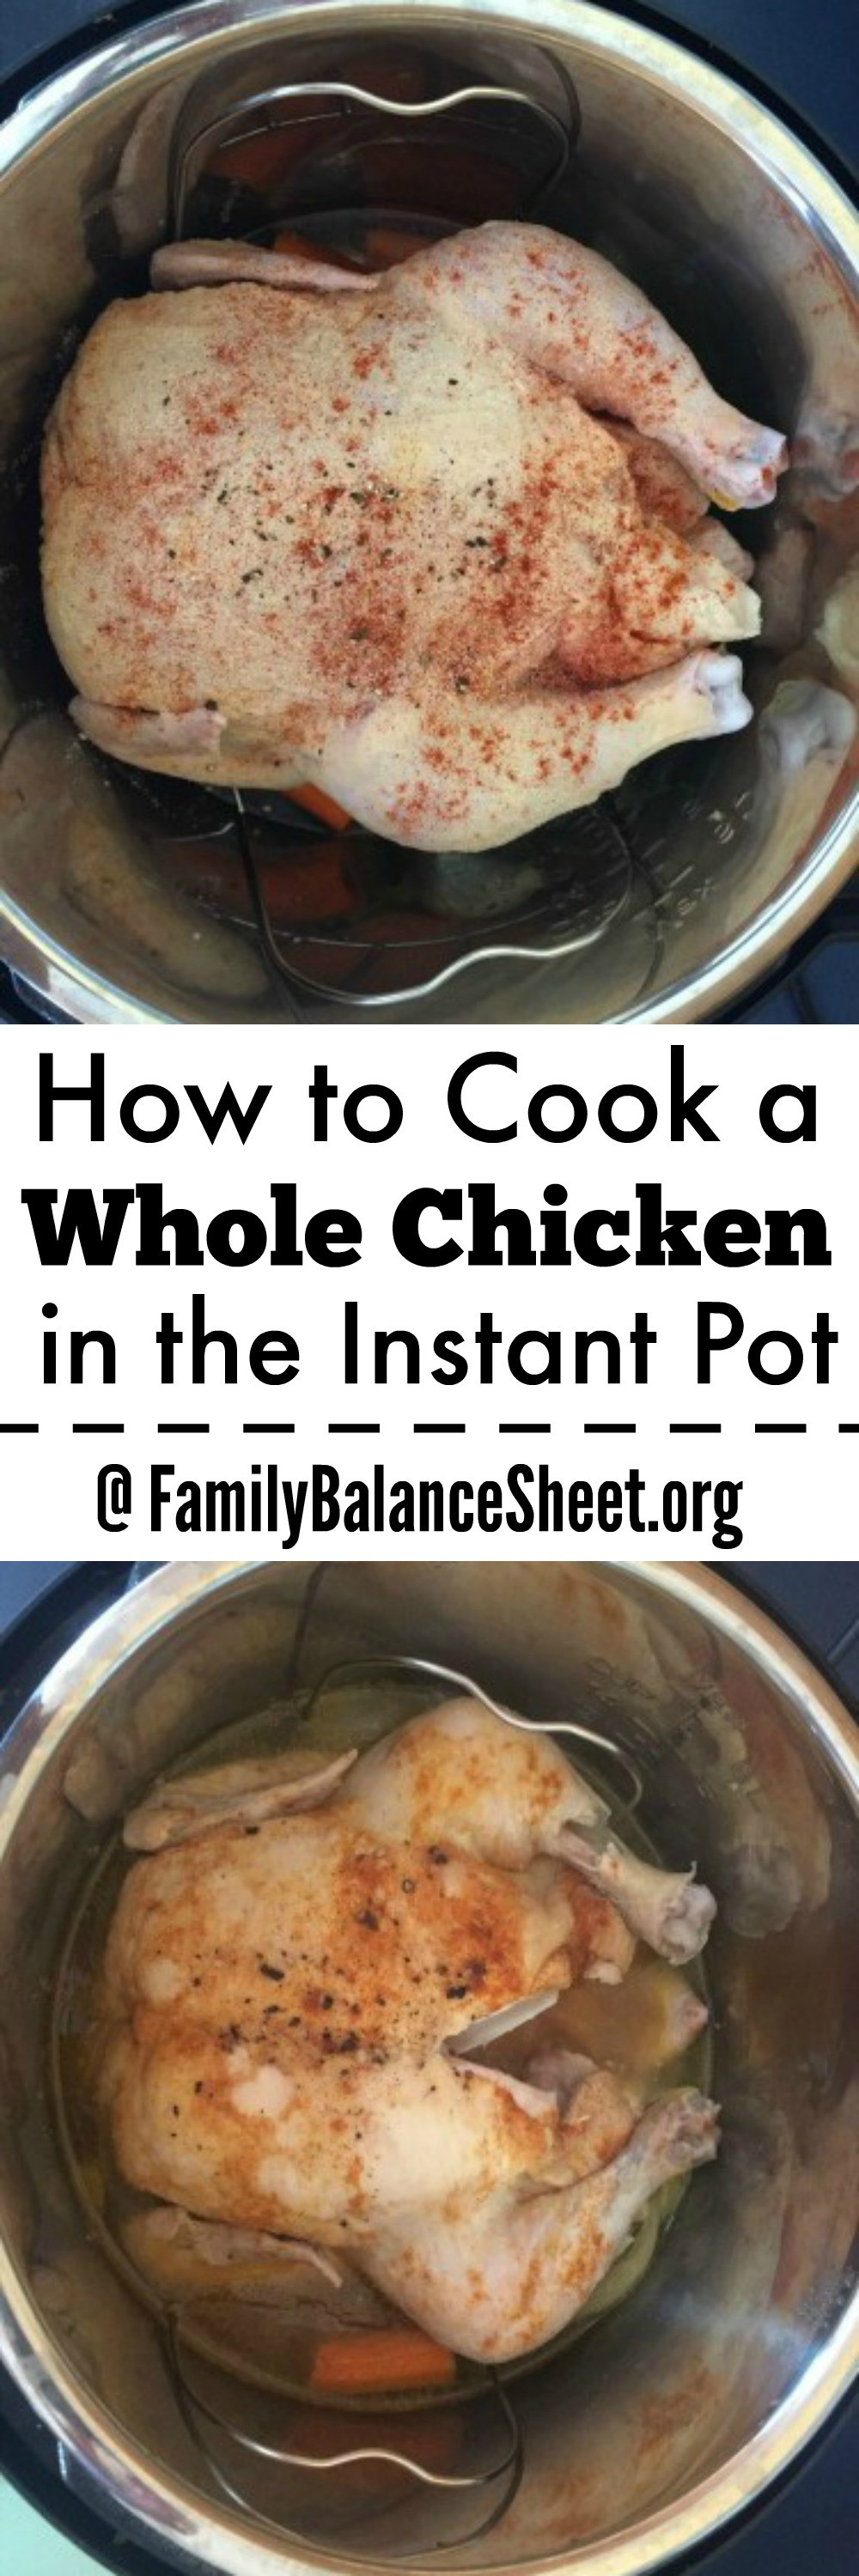 How To Cook A Whole Chicken
 How to Cook a Whole Chicken in the Instant Pot Family